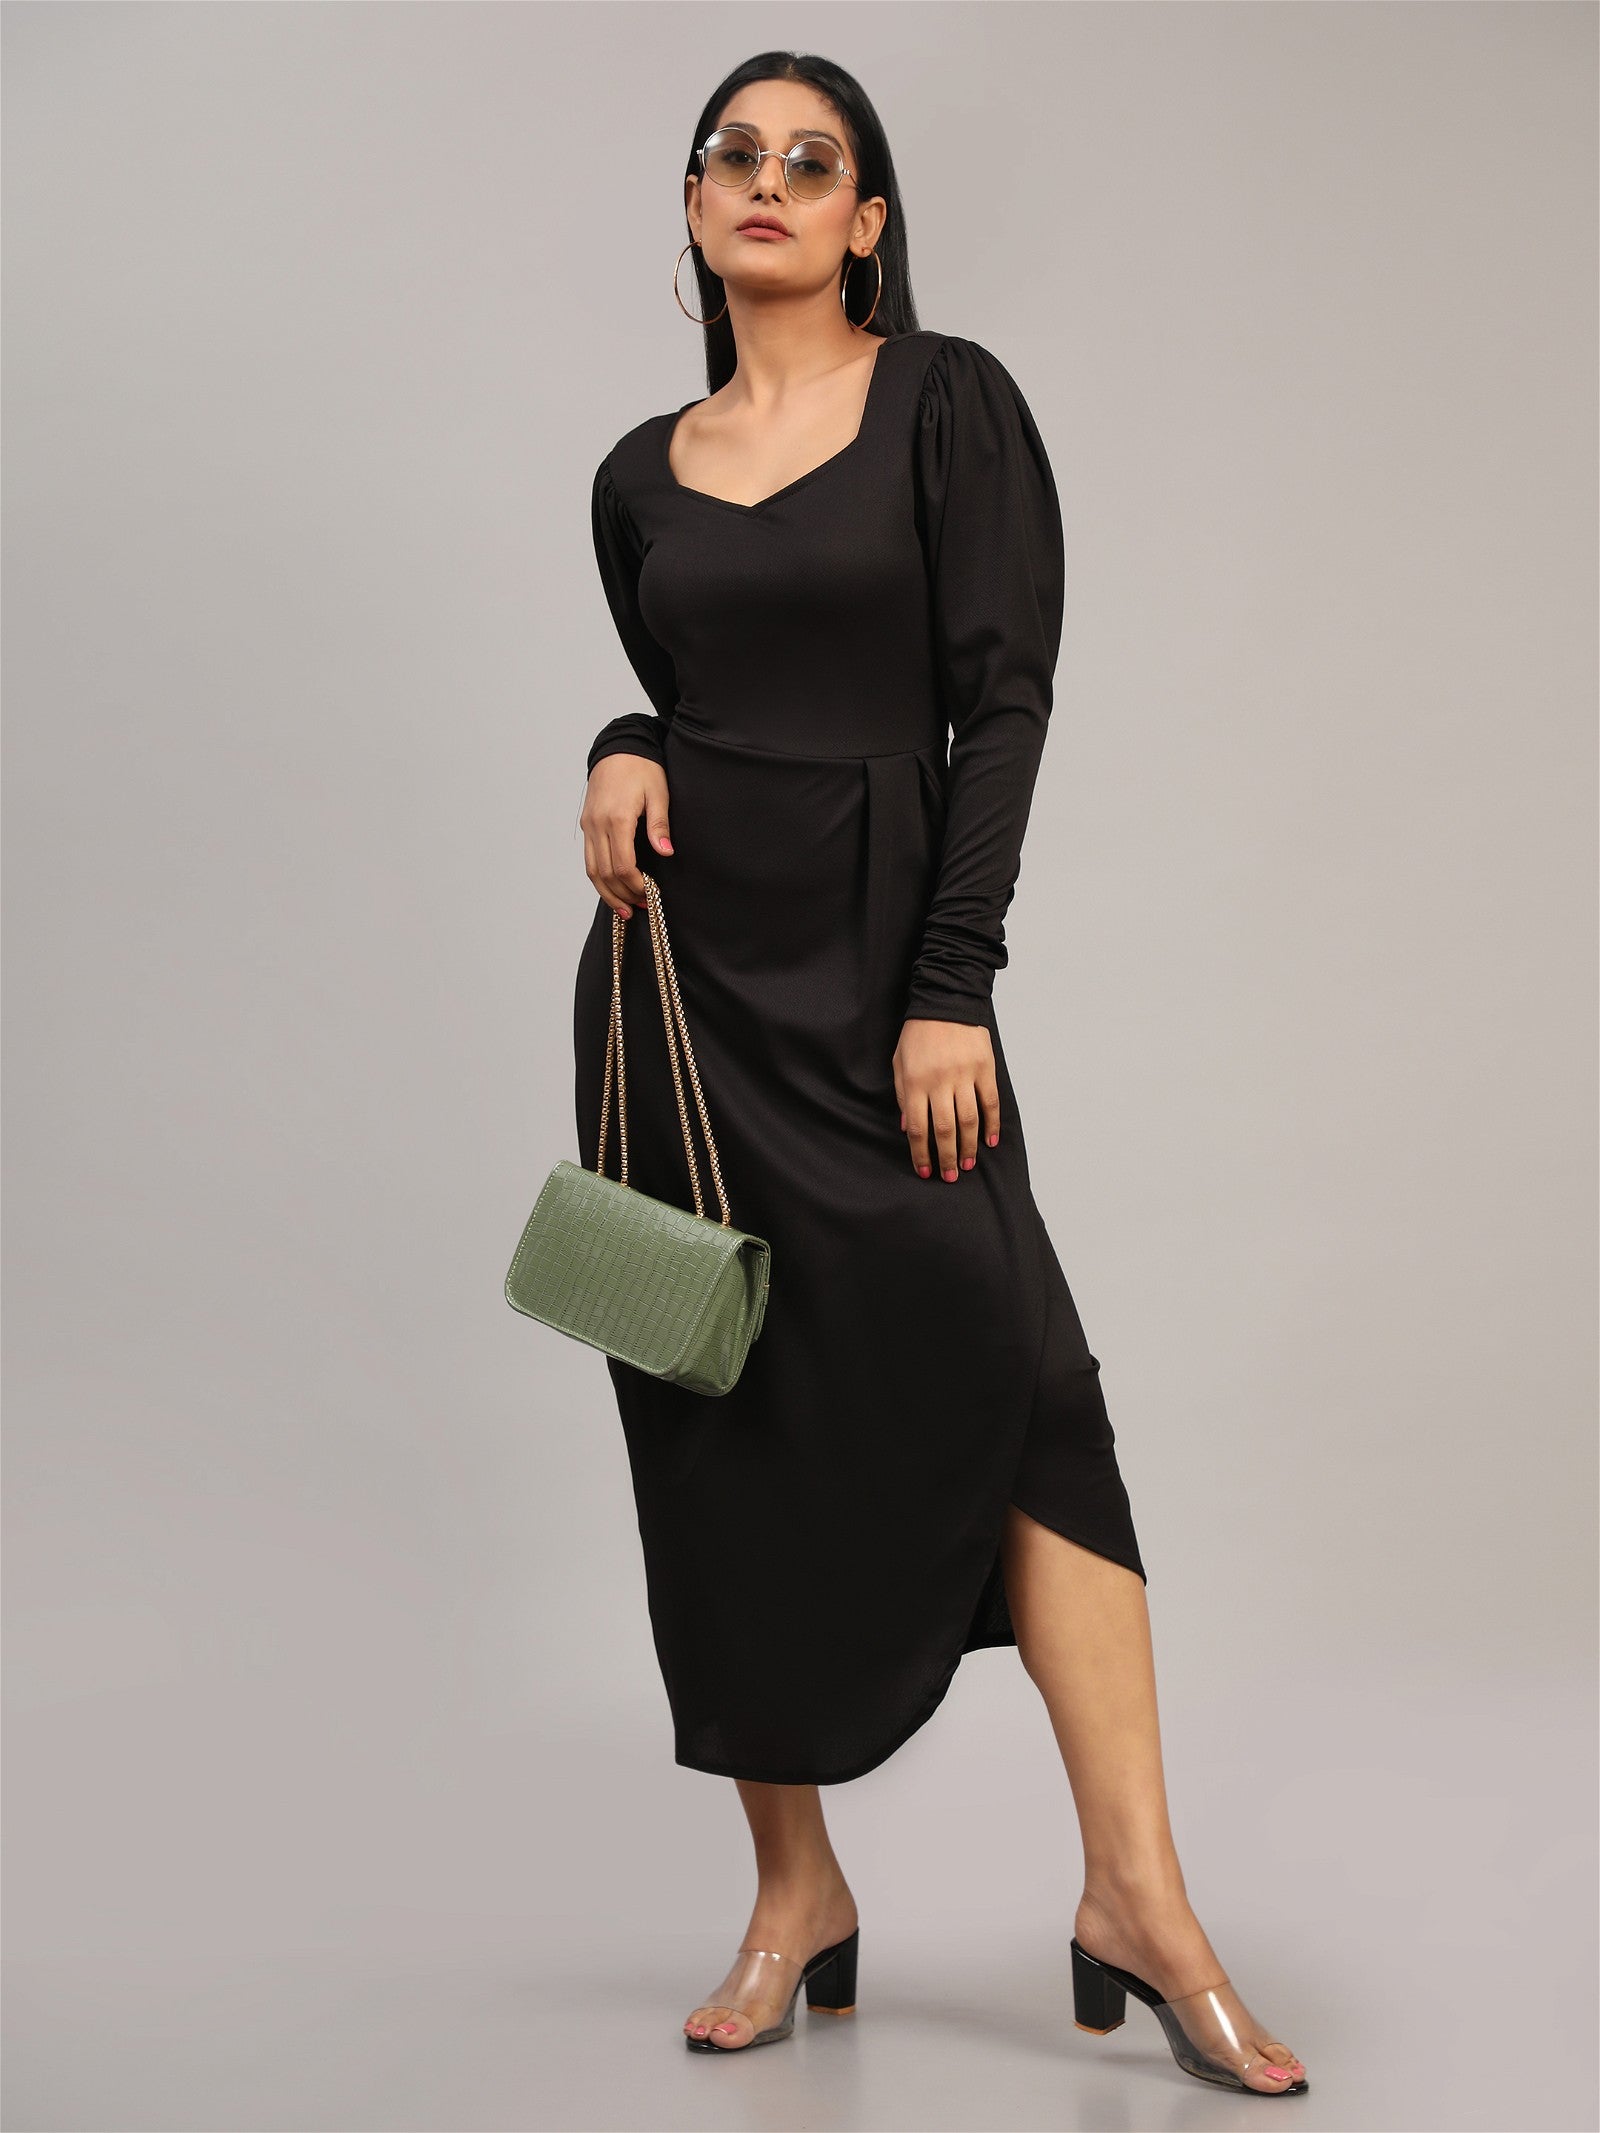 The model in the image is wearing Cotton Lycra tops Western Wear Collection from Alice Milan. Crafted with the finest materials and impeccable attention to detail, the Dress looks premium, trendy, luxurious and offers unparalleled comfort. It’s a perfect clothing option for loungewear, resort wear, party wear or for an airport look. The woman in the image looks happy, and confident with her style statement putting a happy smile on her face.